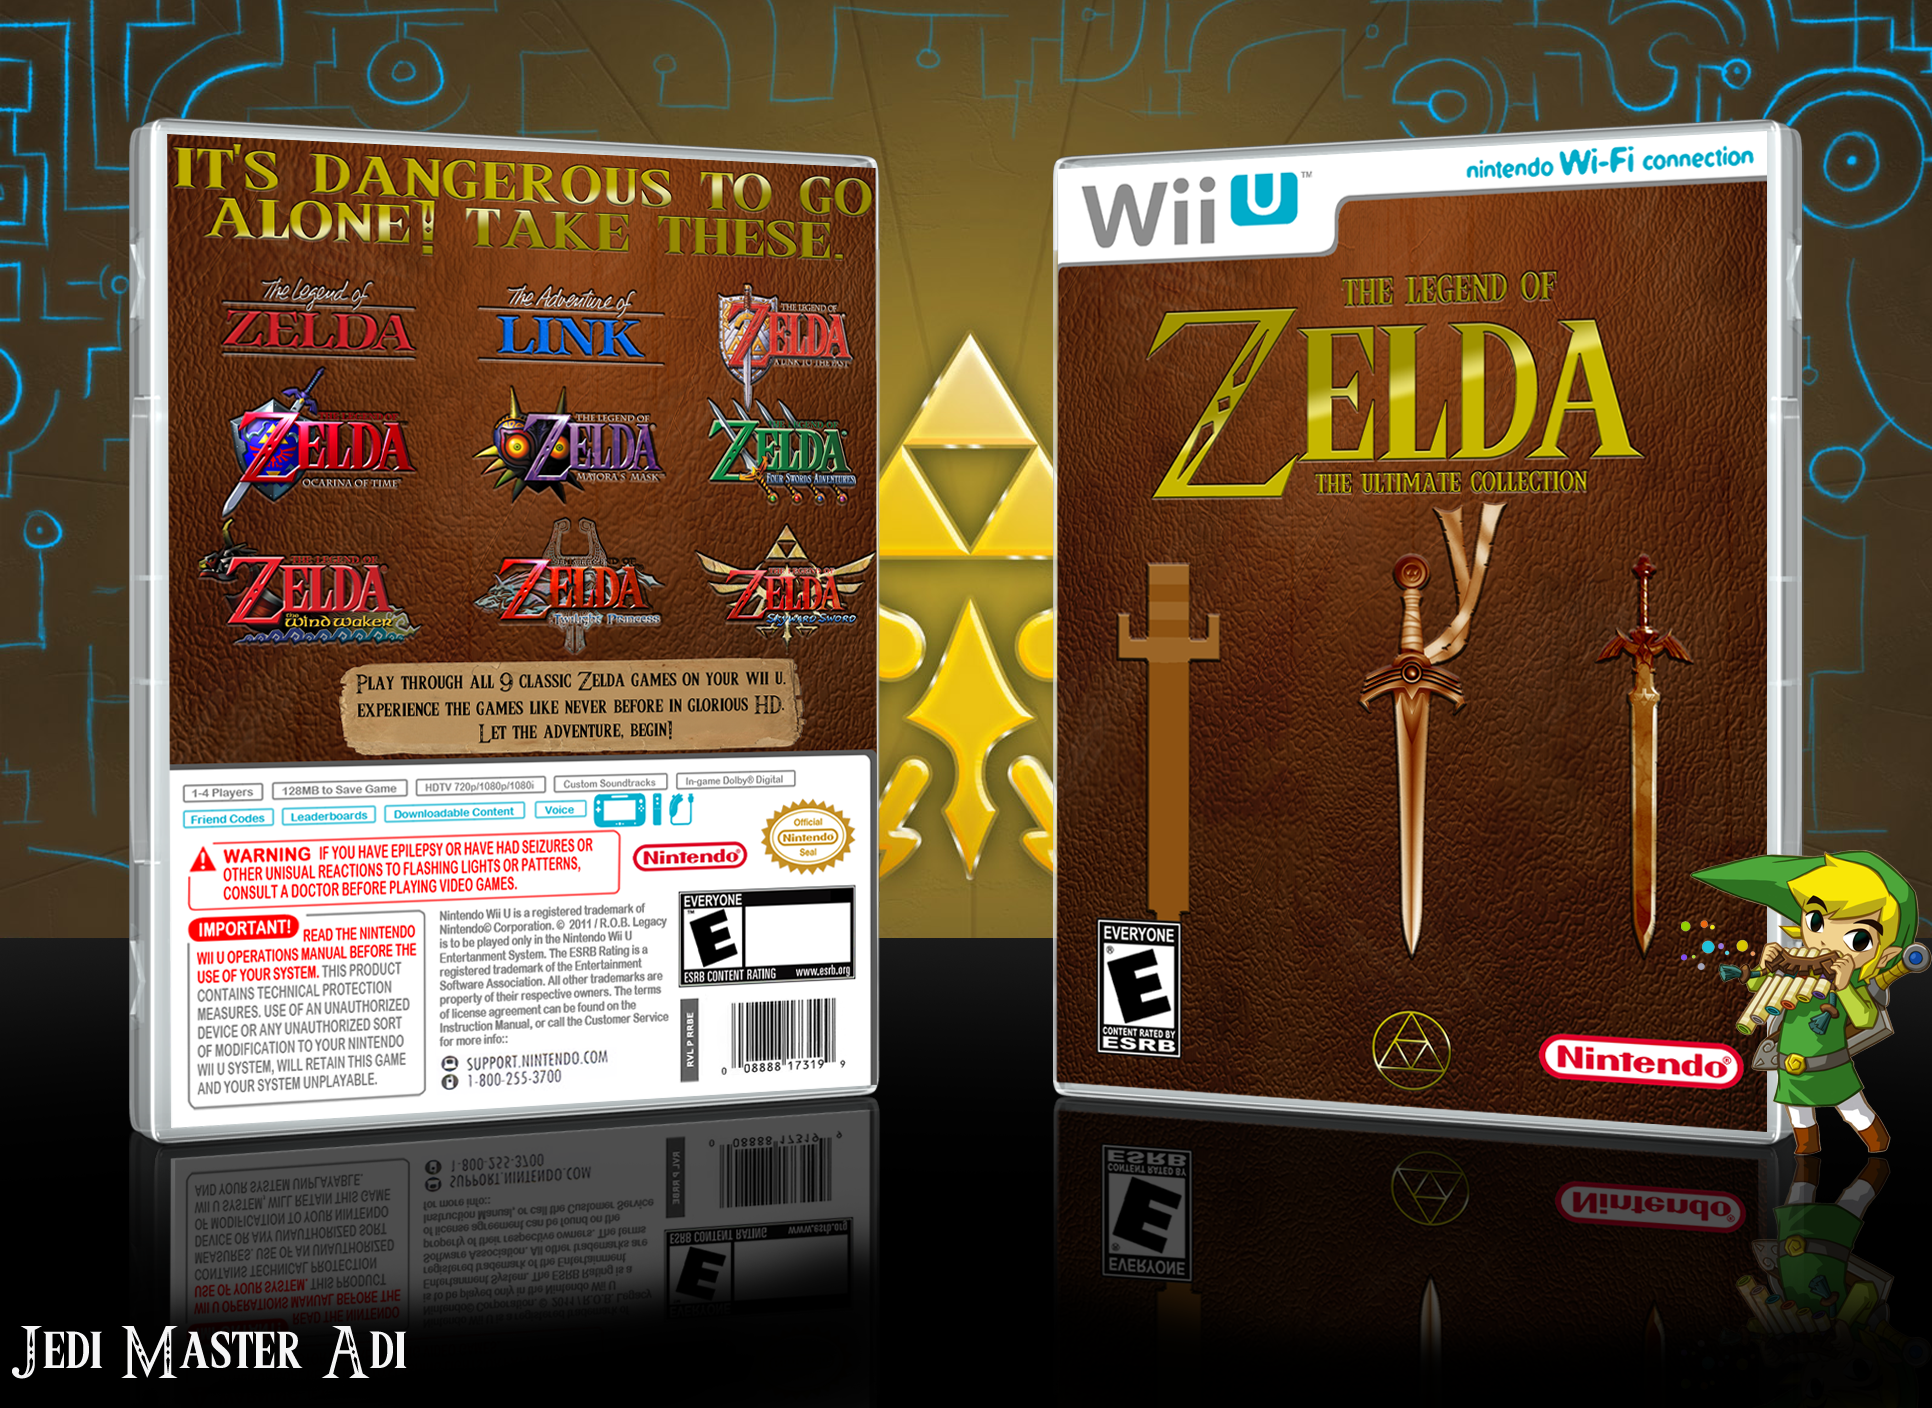 The Legend of Zelda: The Complete Collection box cover